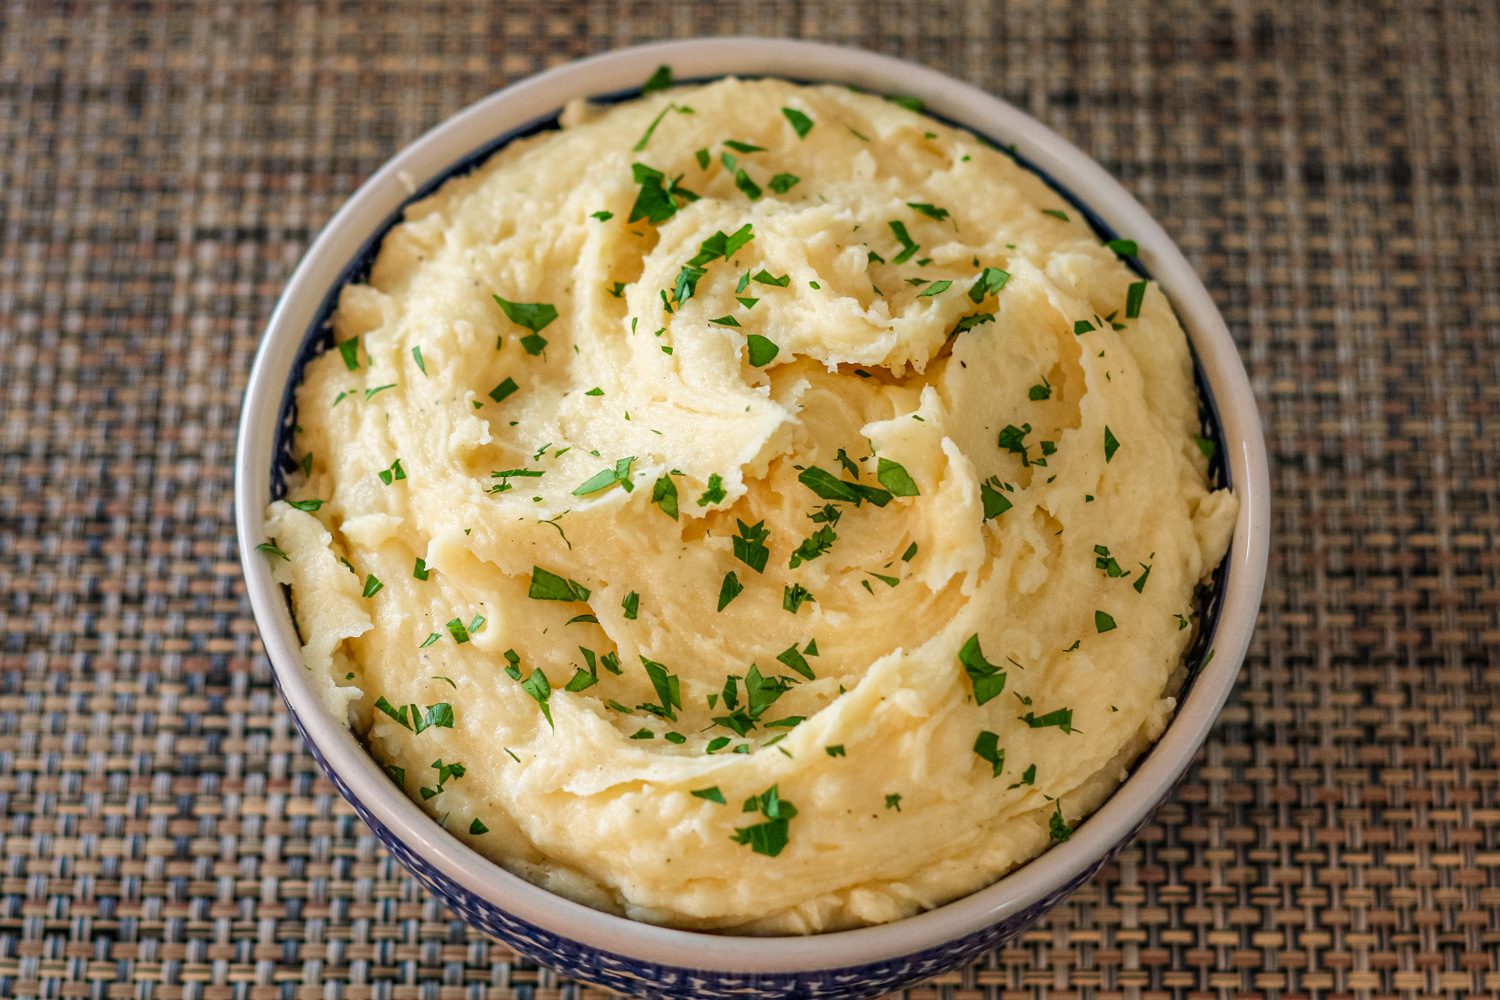 smoked cheddar mashed potatoes garnished with parsley in a serving bowl